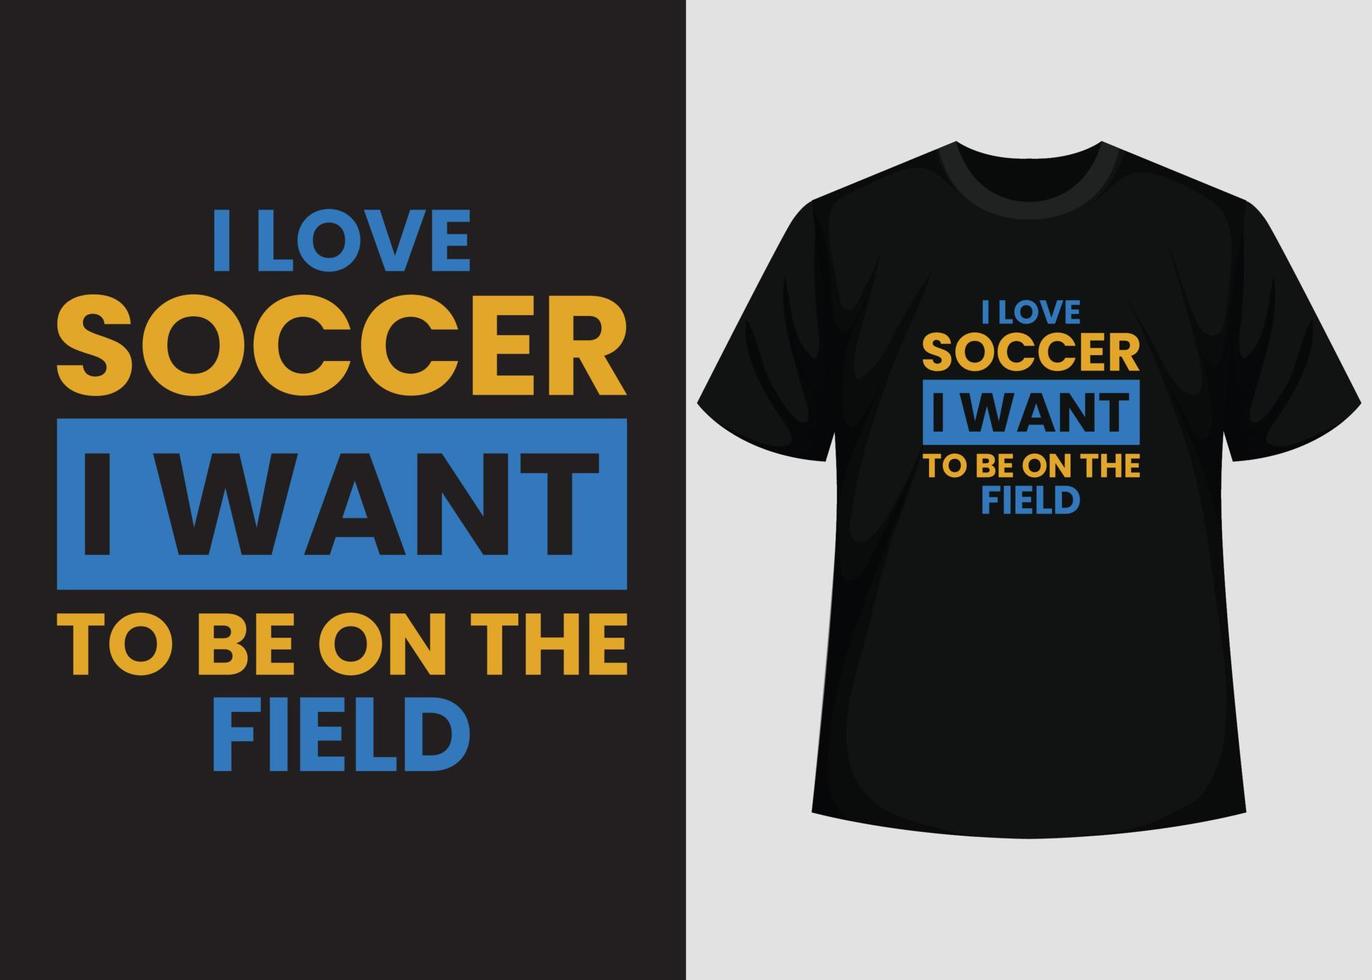 I Love Soccer, I Want To Be On The Field T shirt Design. Best Happy Football Day T Shirt Design. T-shirt Design, Typography T Shirt, Vector and Illustration Elements for a Printable Products.